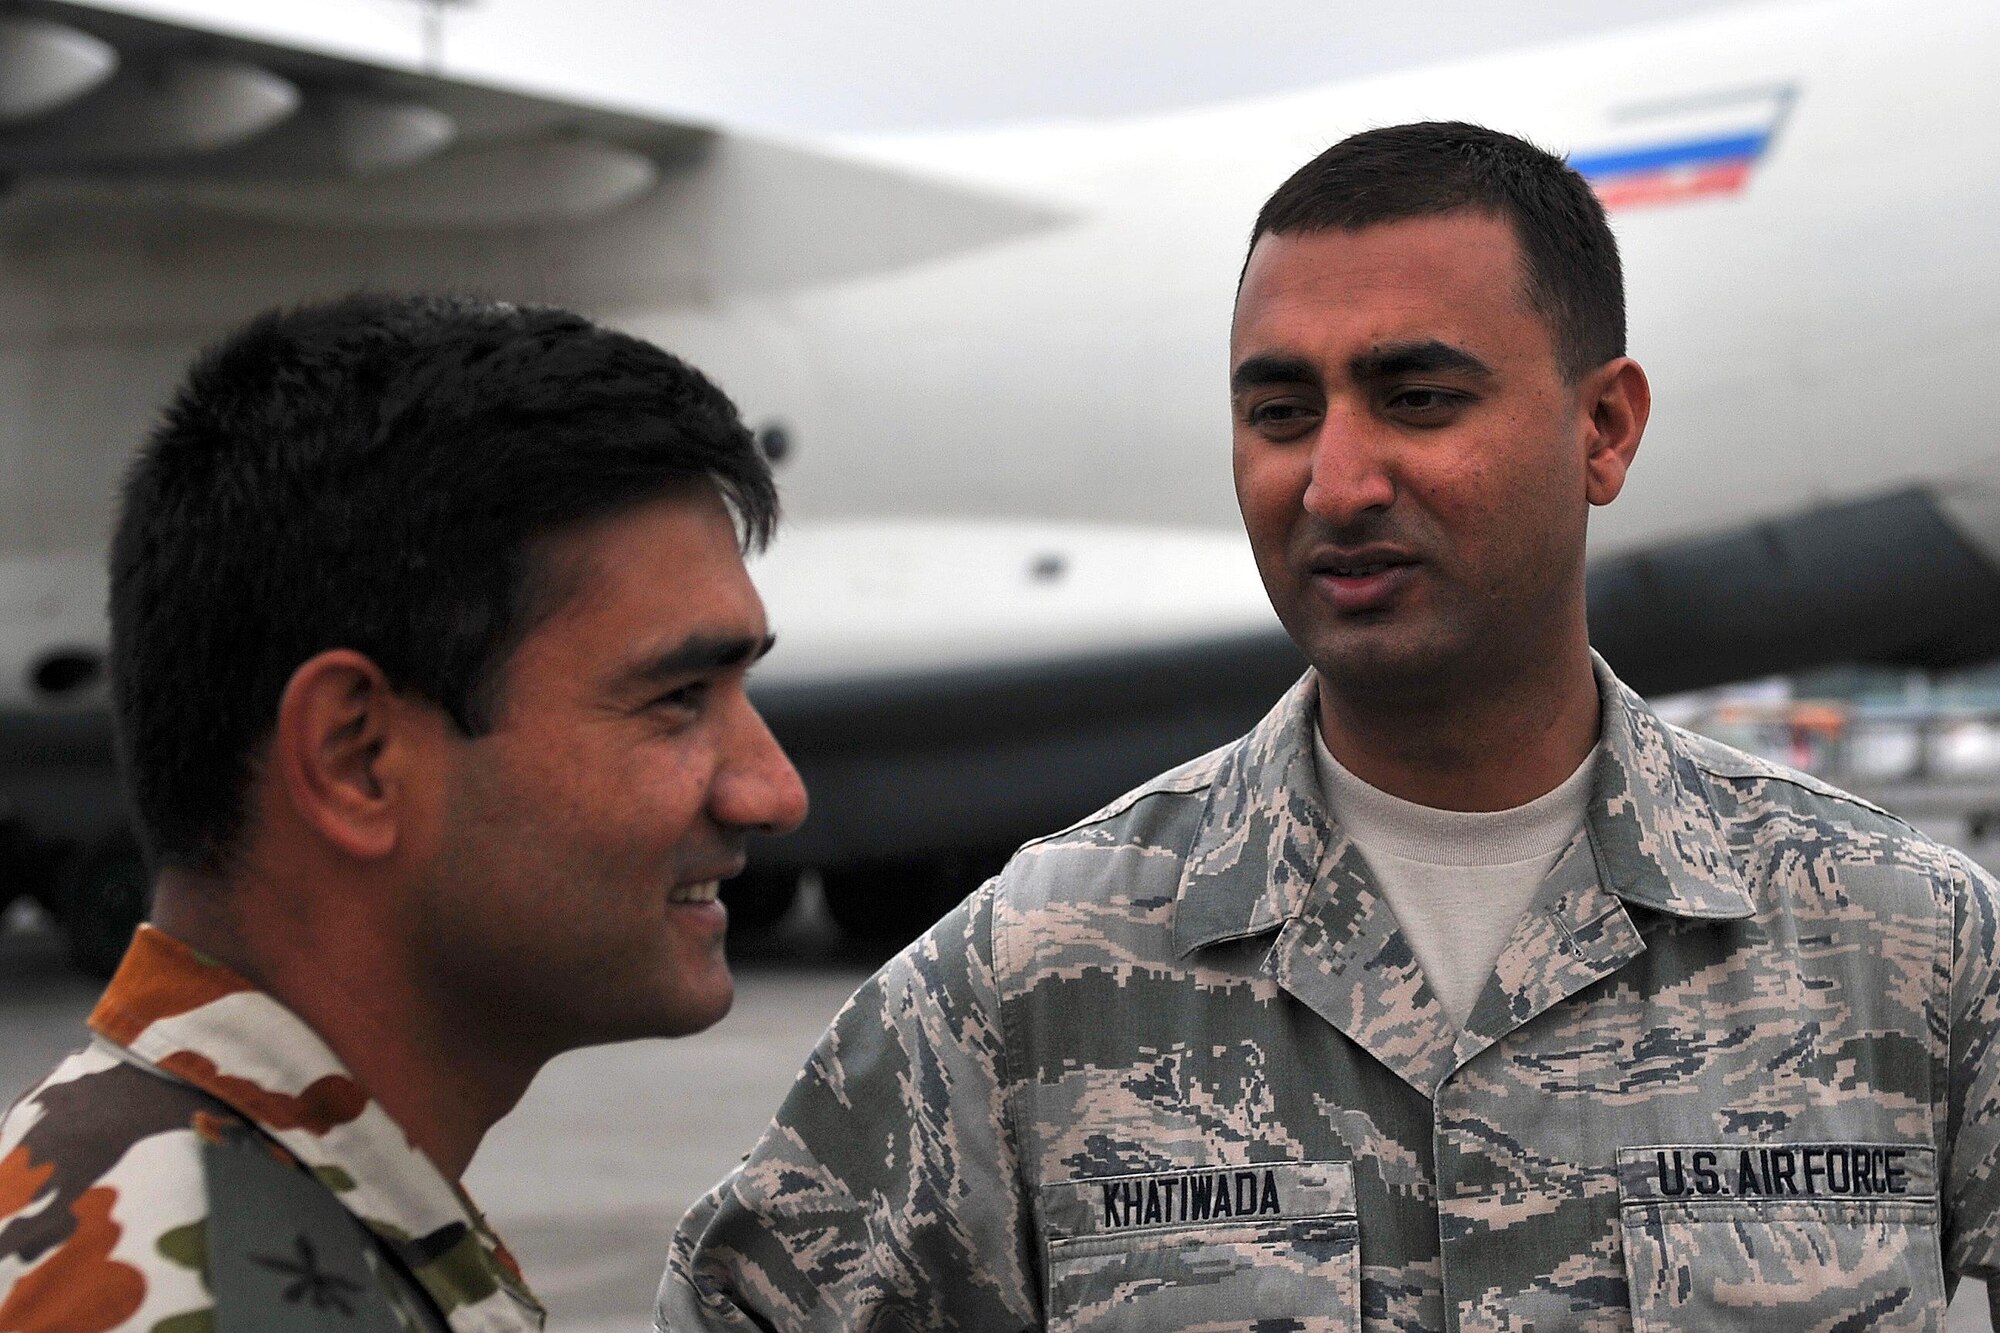 U.S. Air Force Senior Airman Manoj Khatiwada (right), 21st Medical Operations Squadron aerospace medical technician, talks with a Nepalese Army soldier, Tribhuvan International Airport in Kathmandu, Nepal, May 7, 2015. Manoj joined a team from the 36th Contingency Response Group to assist U.S. Air Force, U.S. Department of State and U.S. Agency for International Development operations by assisting with communicating with the Nepalese Army as they process relief supplies following a magnitude 7.8 earthquake that struck the region April 25, 2015. (U.S. Air Force photo by Maj. Ashley Conner/Released)